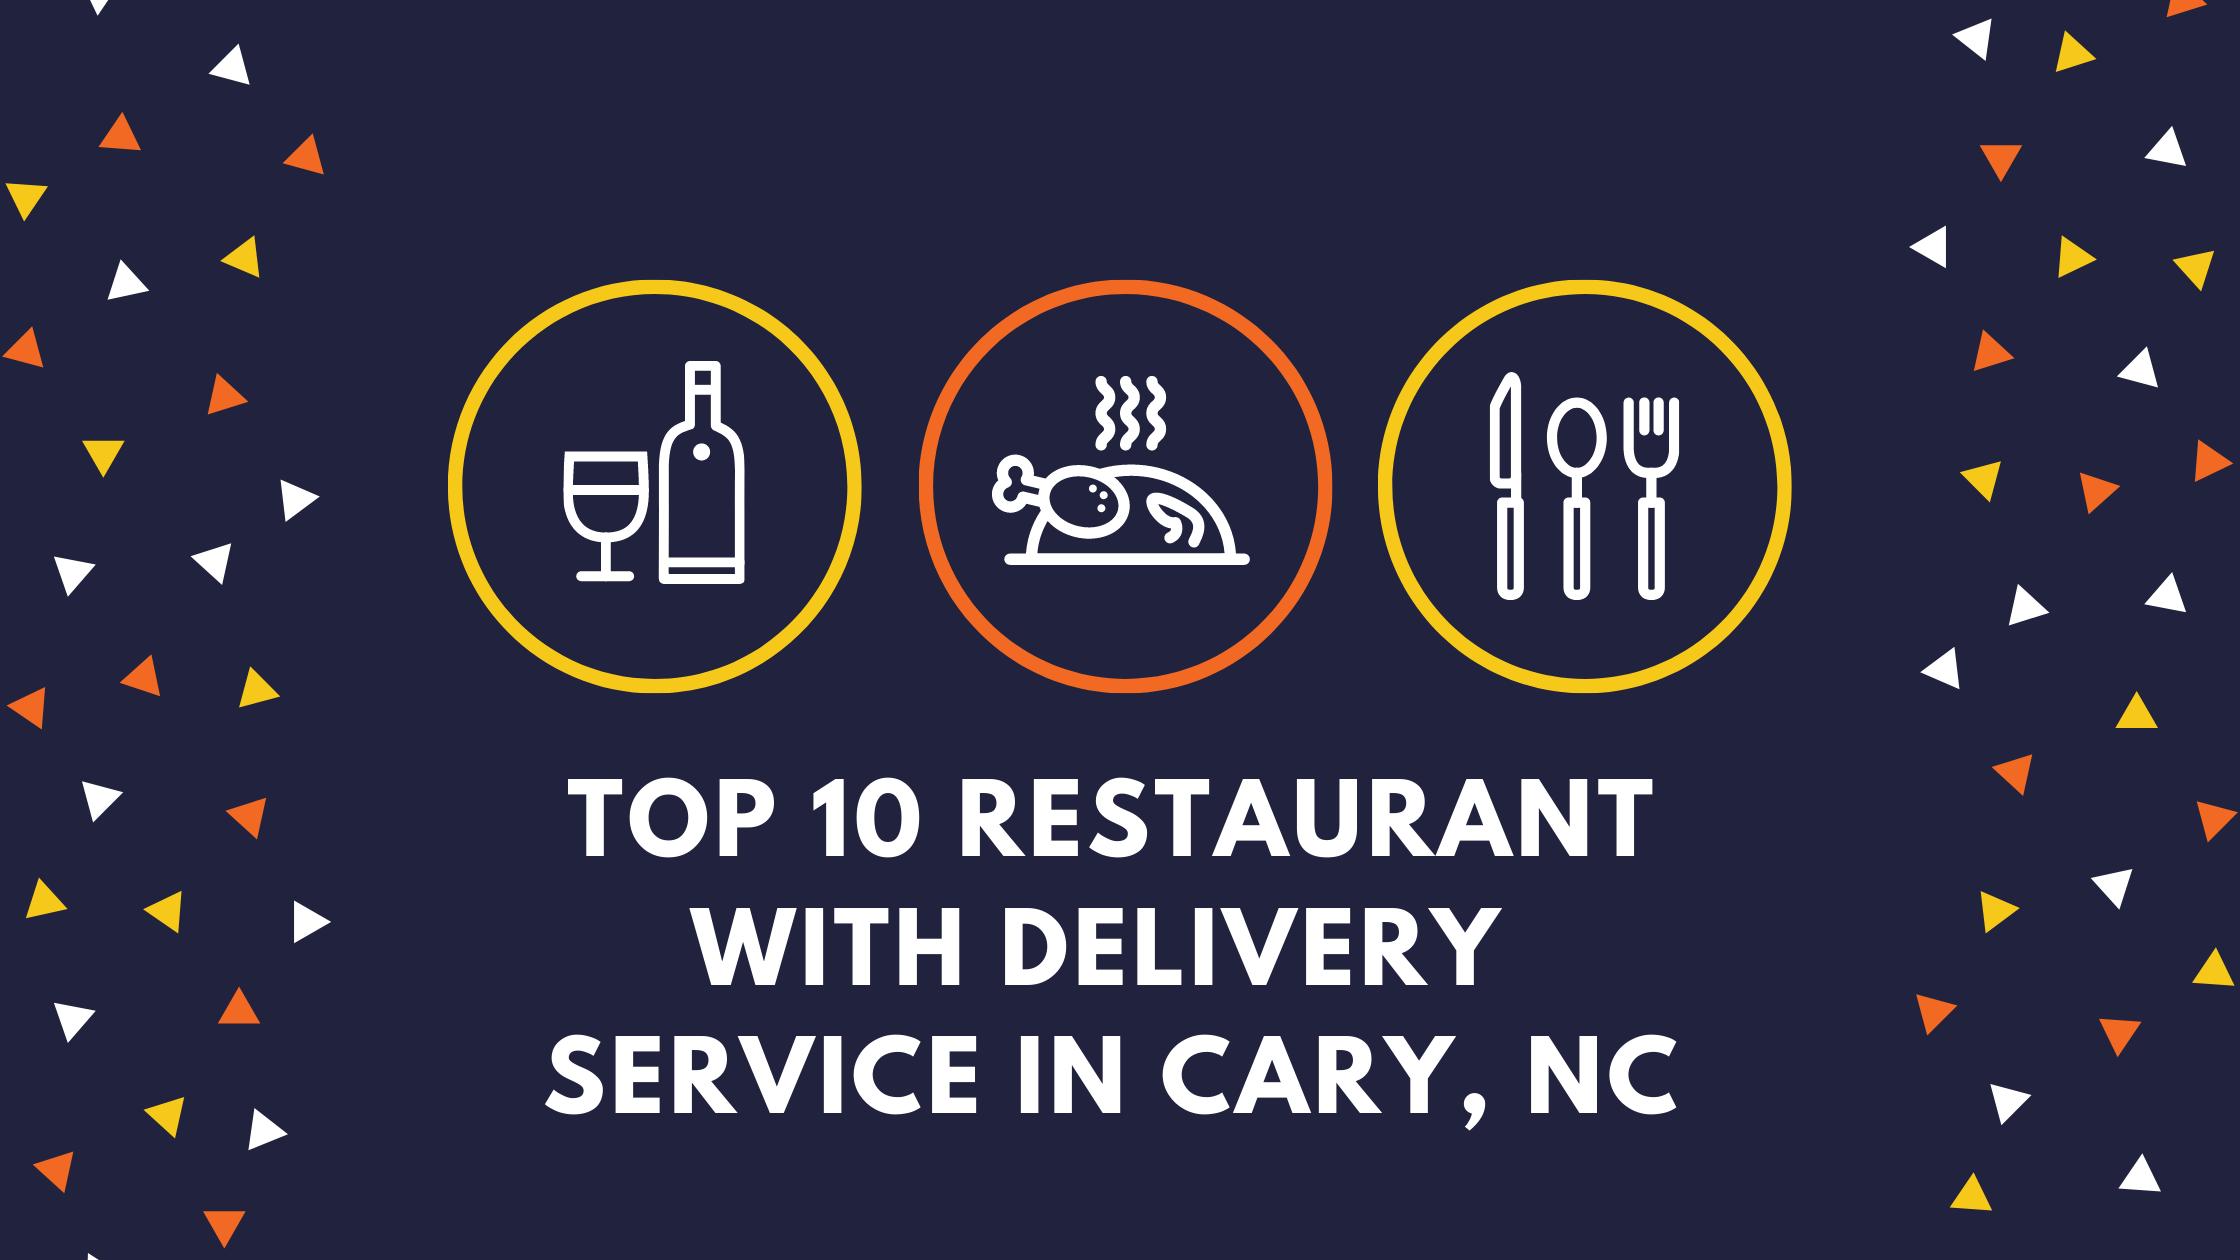 Top 10 restaurant with delivery service in Cary, NC 